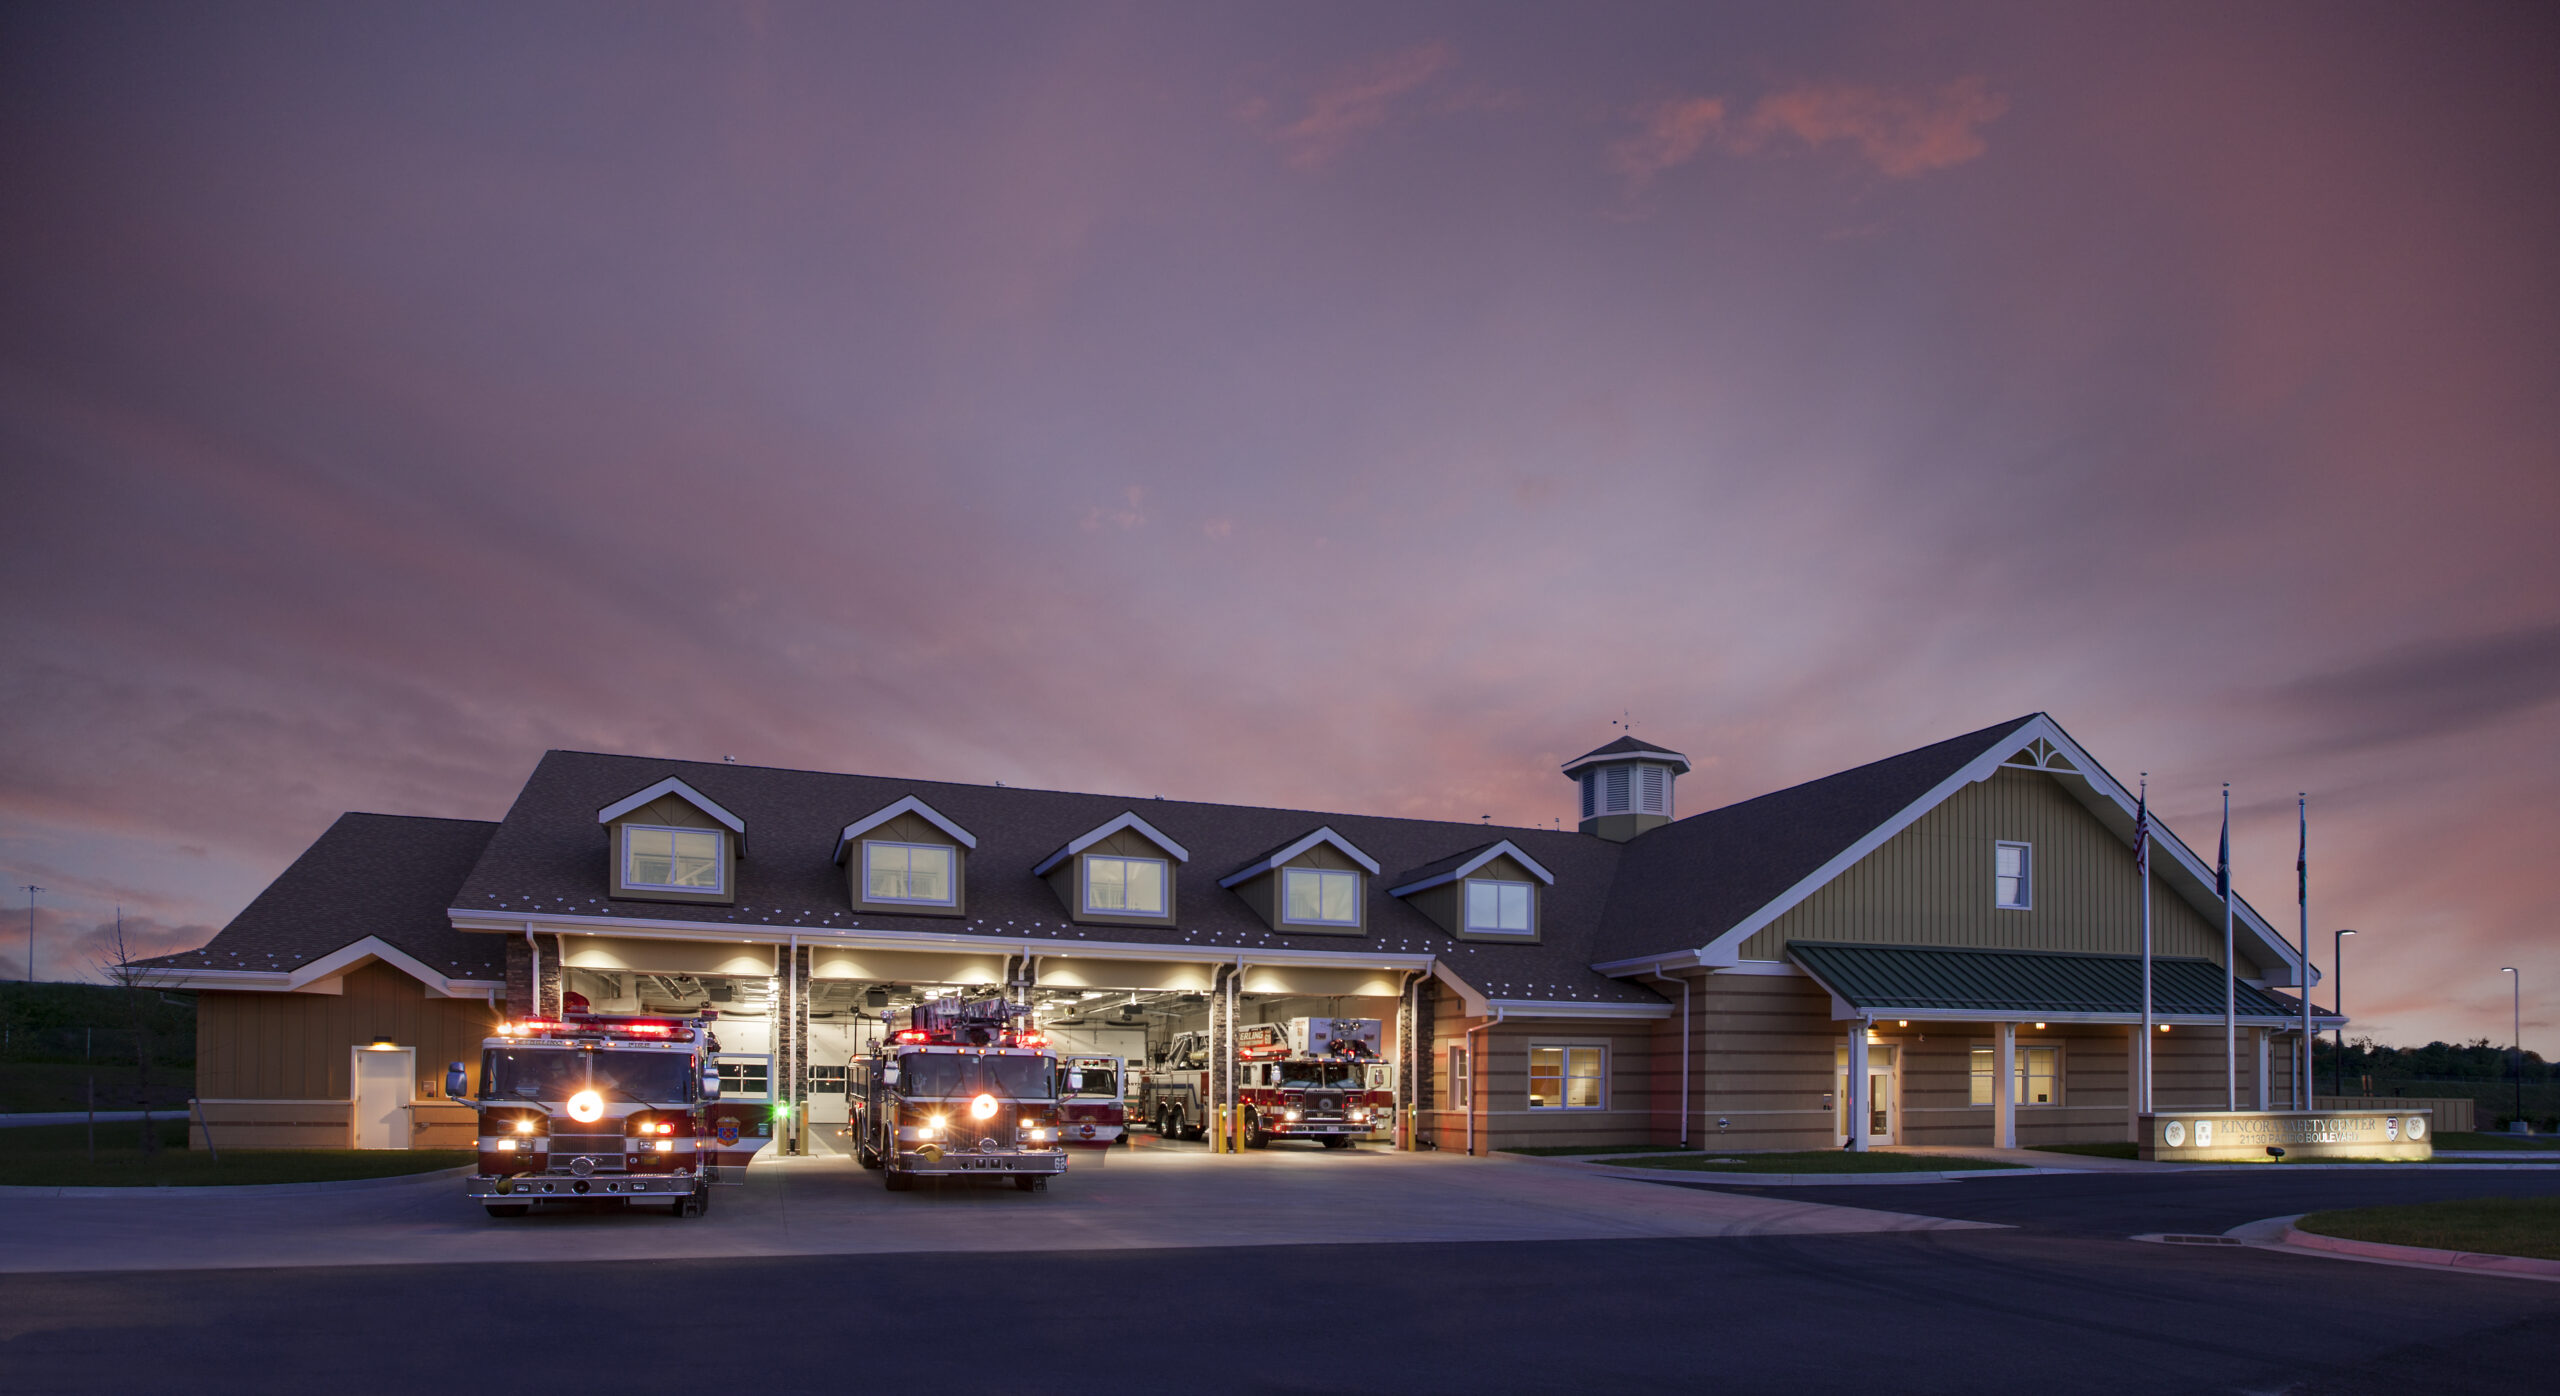 Exterior image of the Kincora Safety Center in Sterling Virginia by Jeffrey Sauers of Commercial Photographics